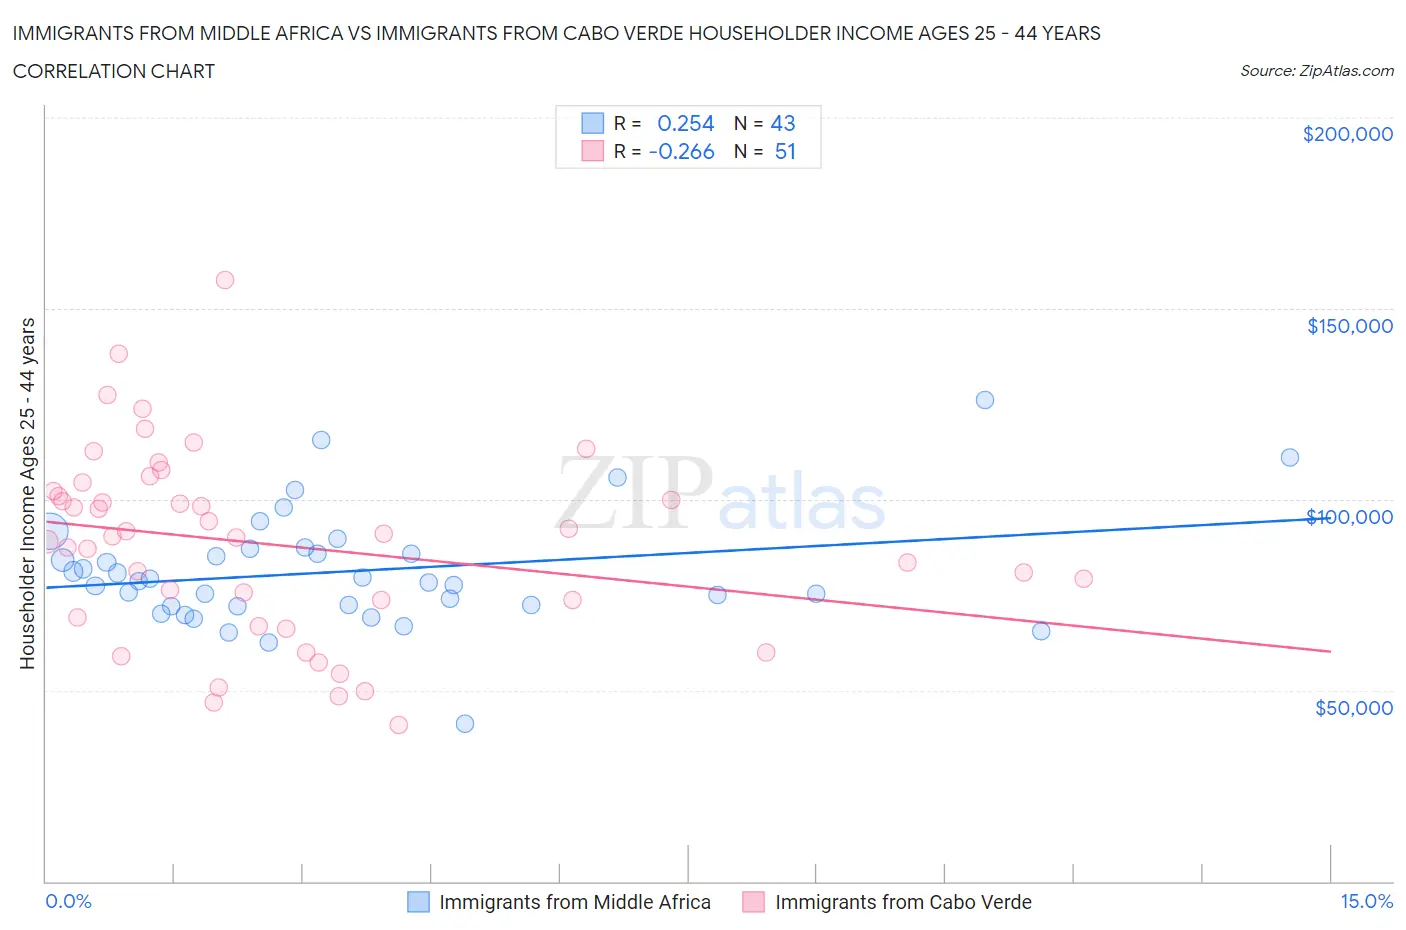 Immigrants from Middle Africa vs Immigrants from Cabo Verde Householder Income Ages 25 - 44 years